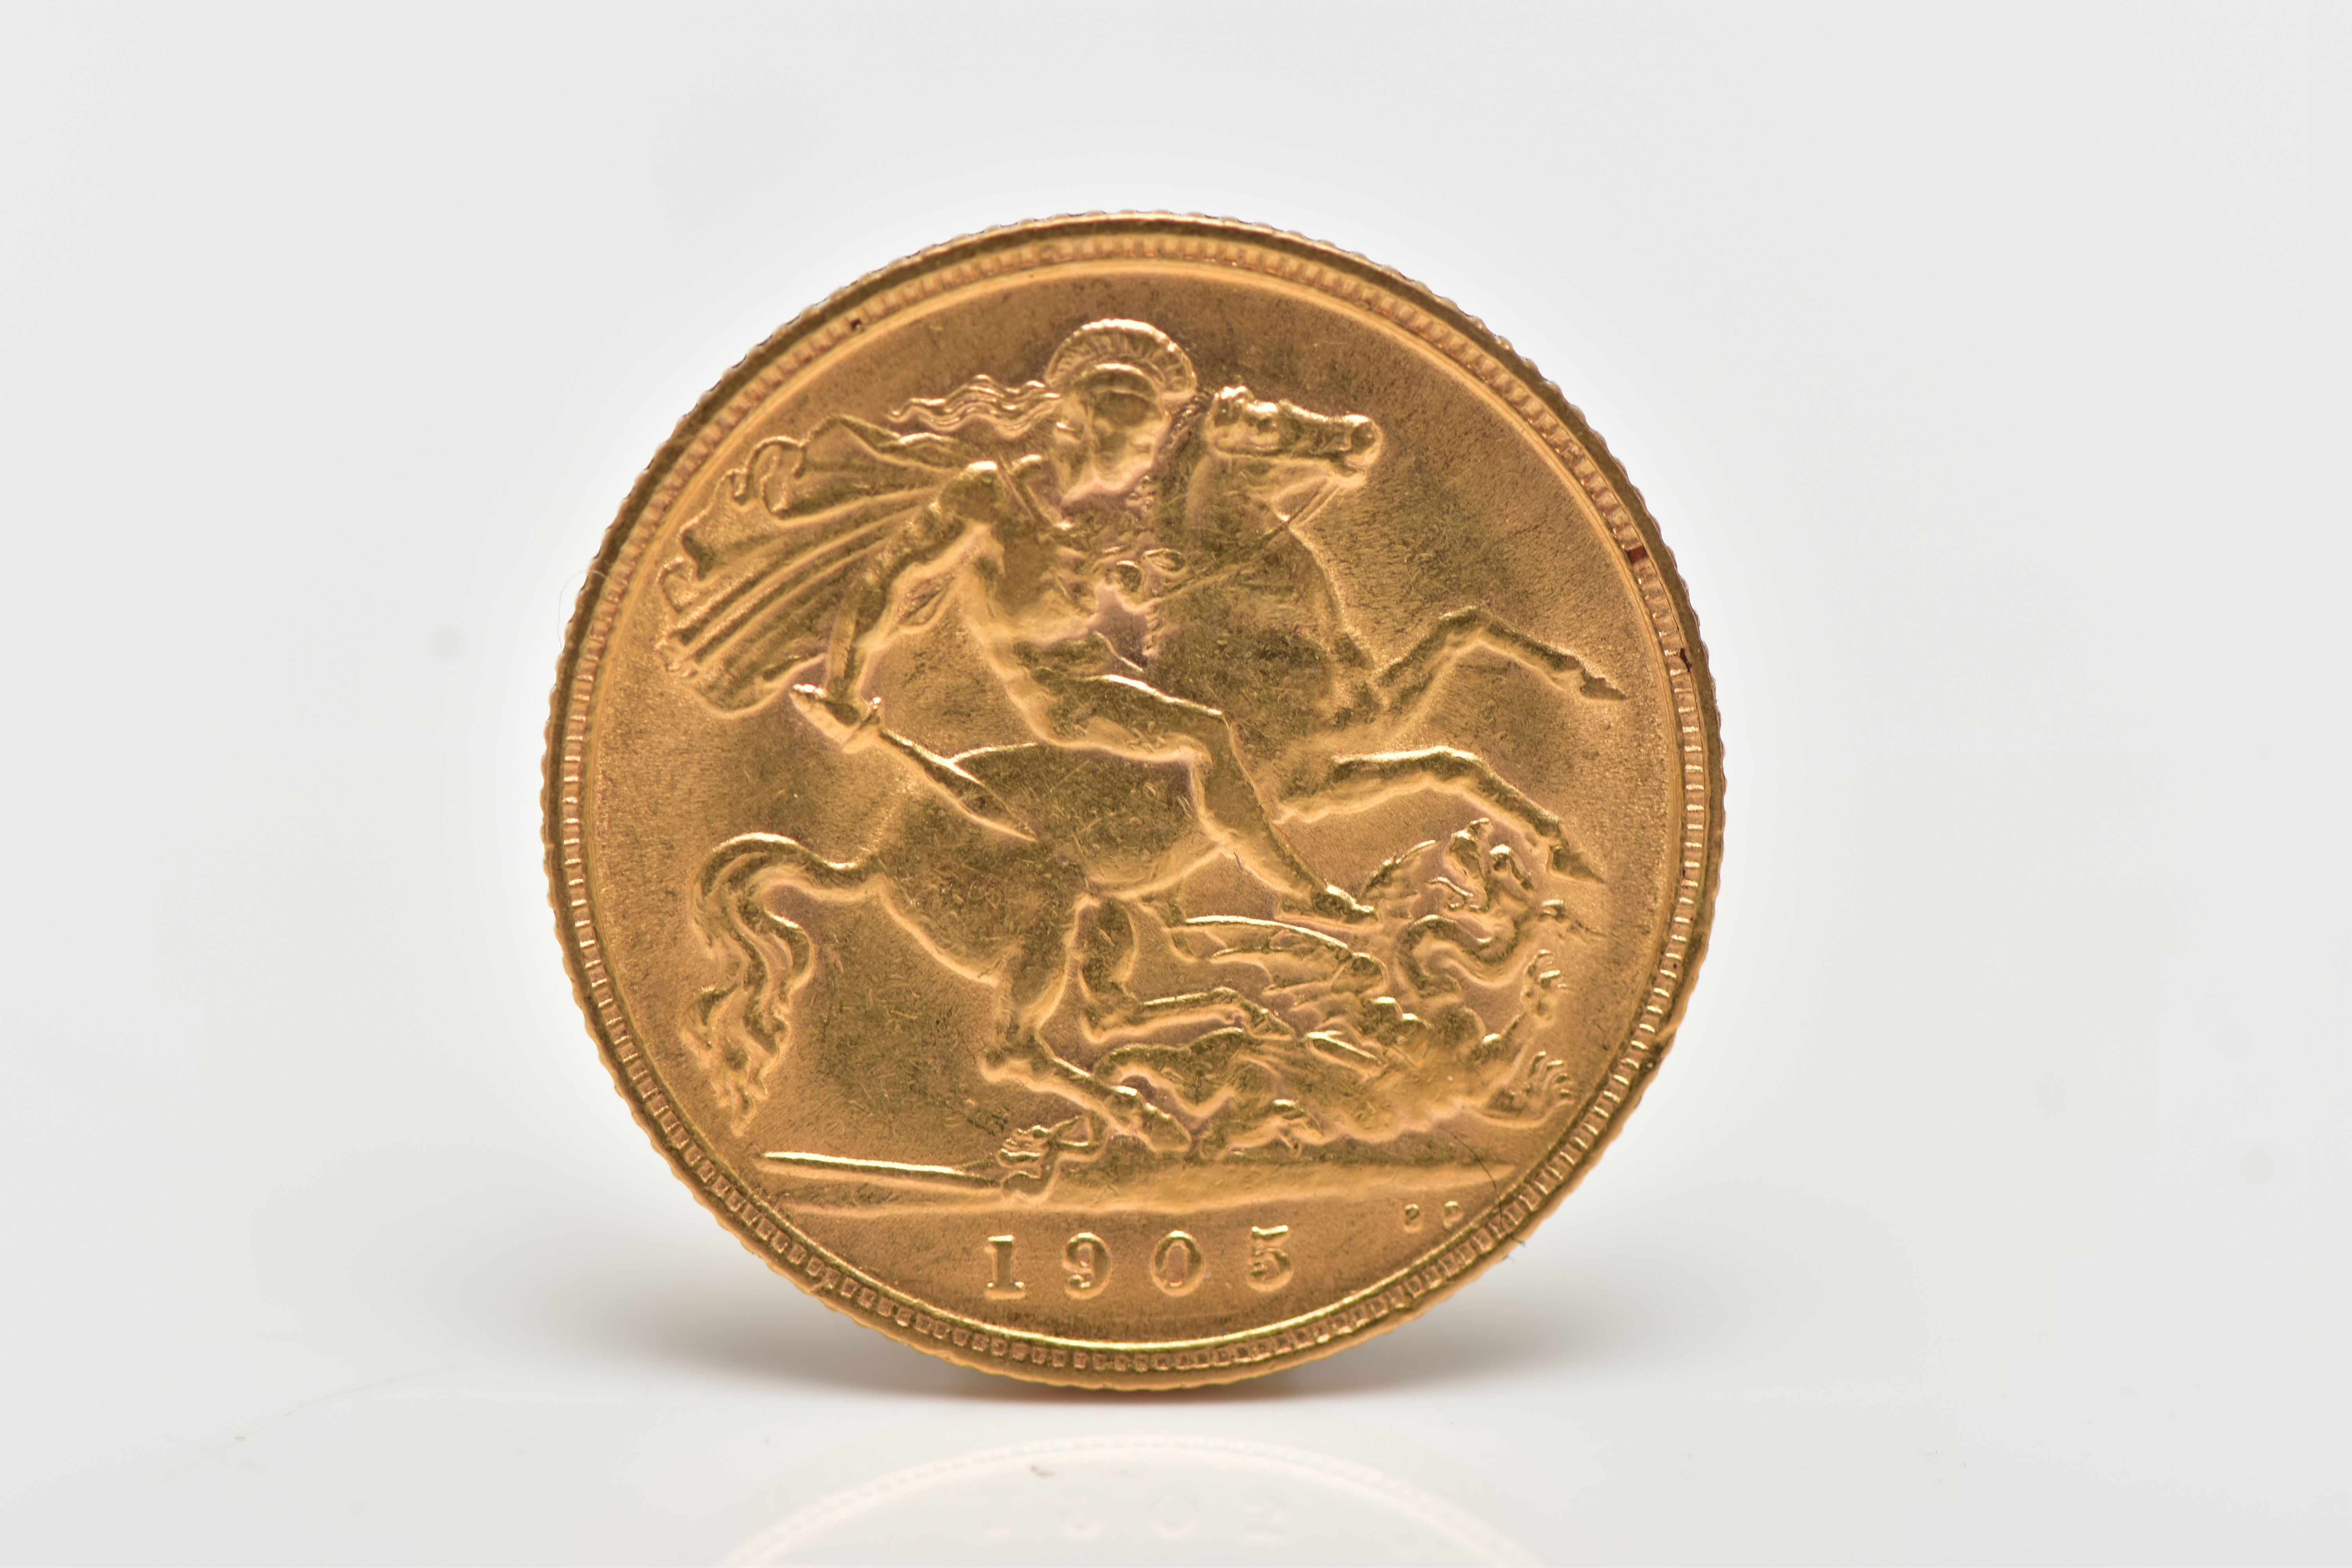 A GOLD HALF SOVEREIGN COIN 1905 EDWARD VII, 19.30 Dia, 3.994 gram, 22ct 916.6 fine, together with - Image 4 of 5